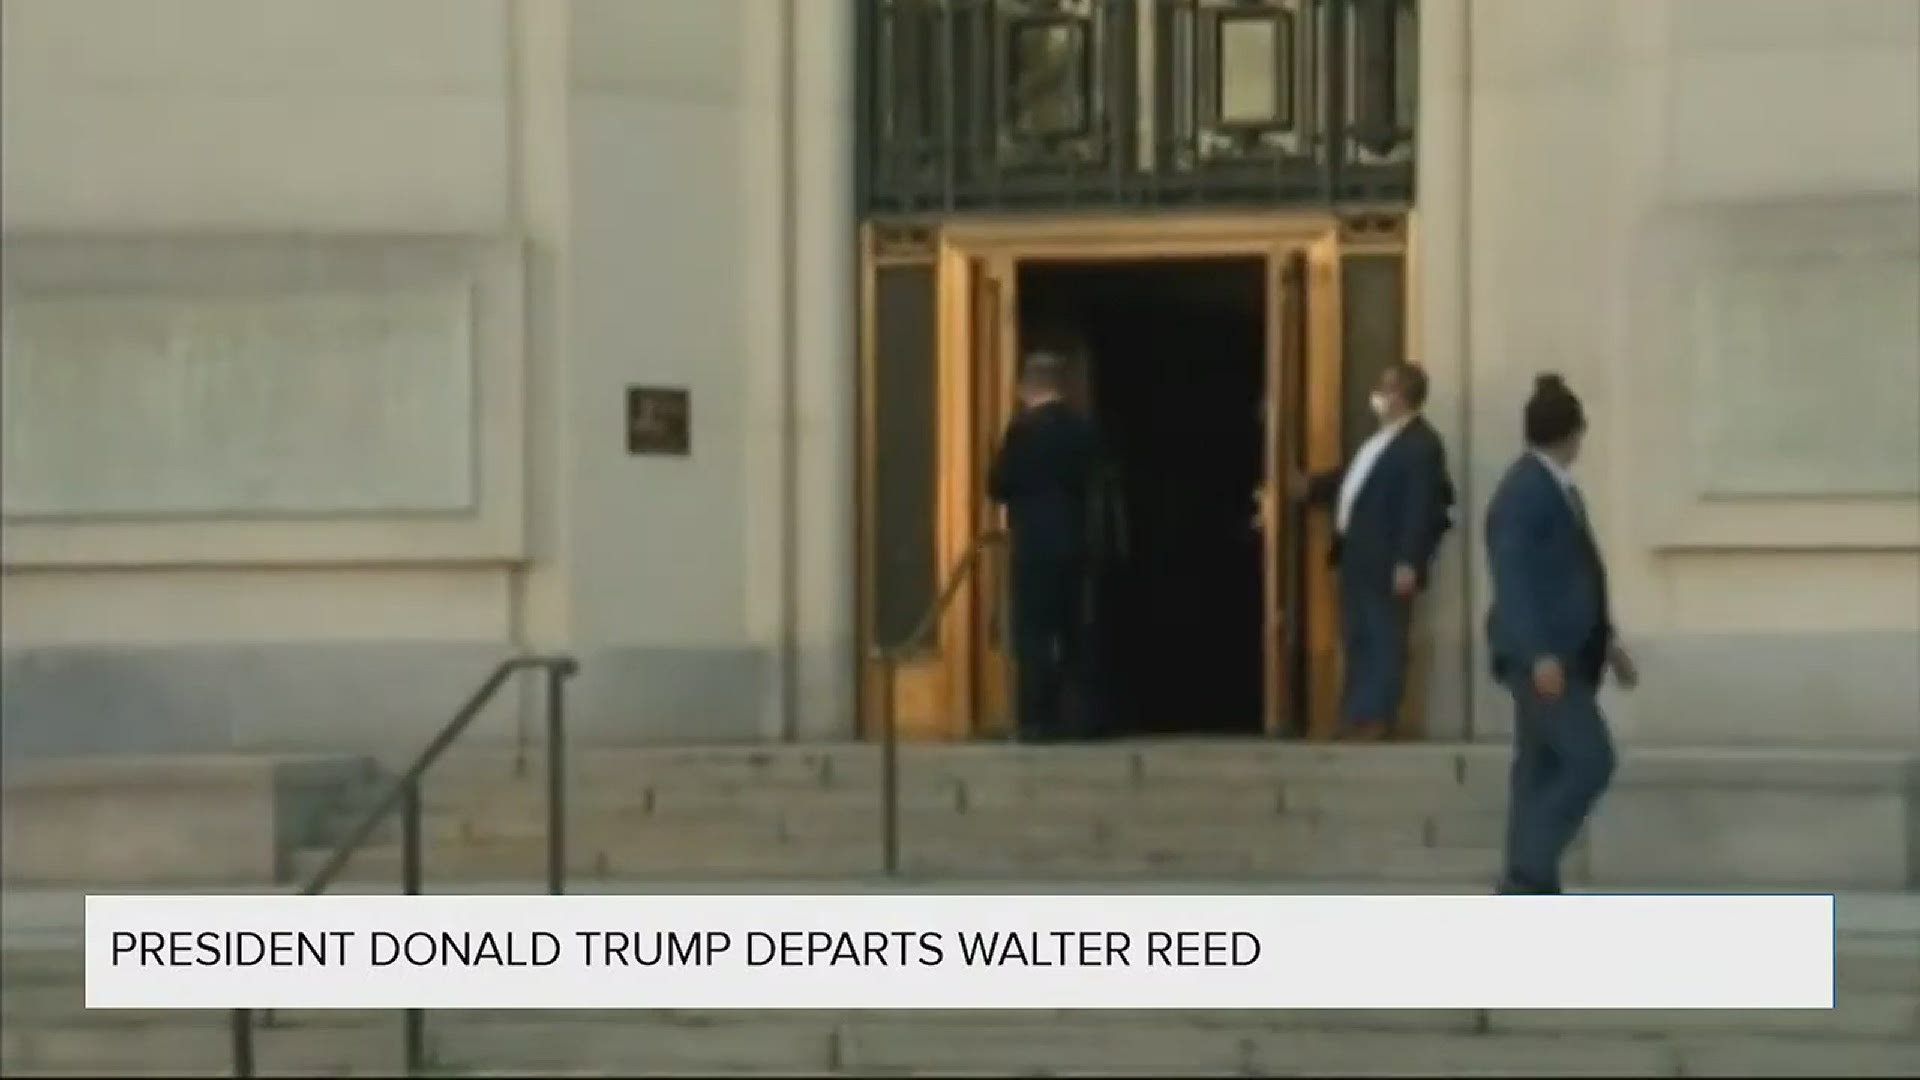 President Donald Trump said Monday he's leaving the military hospital where he has been treated for COVID-19 and will continue his recovery at the White House.